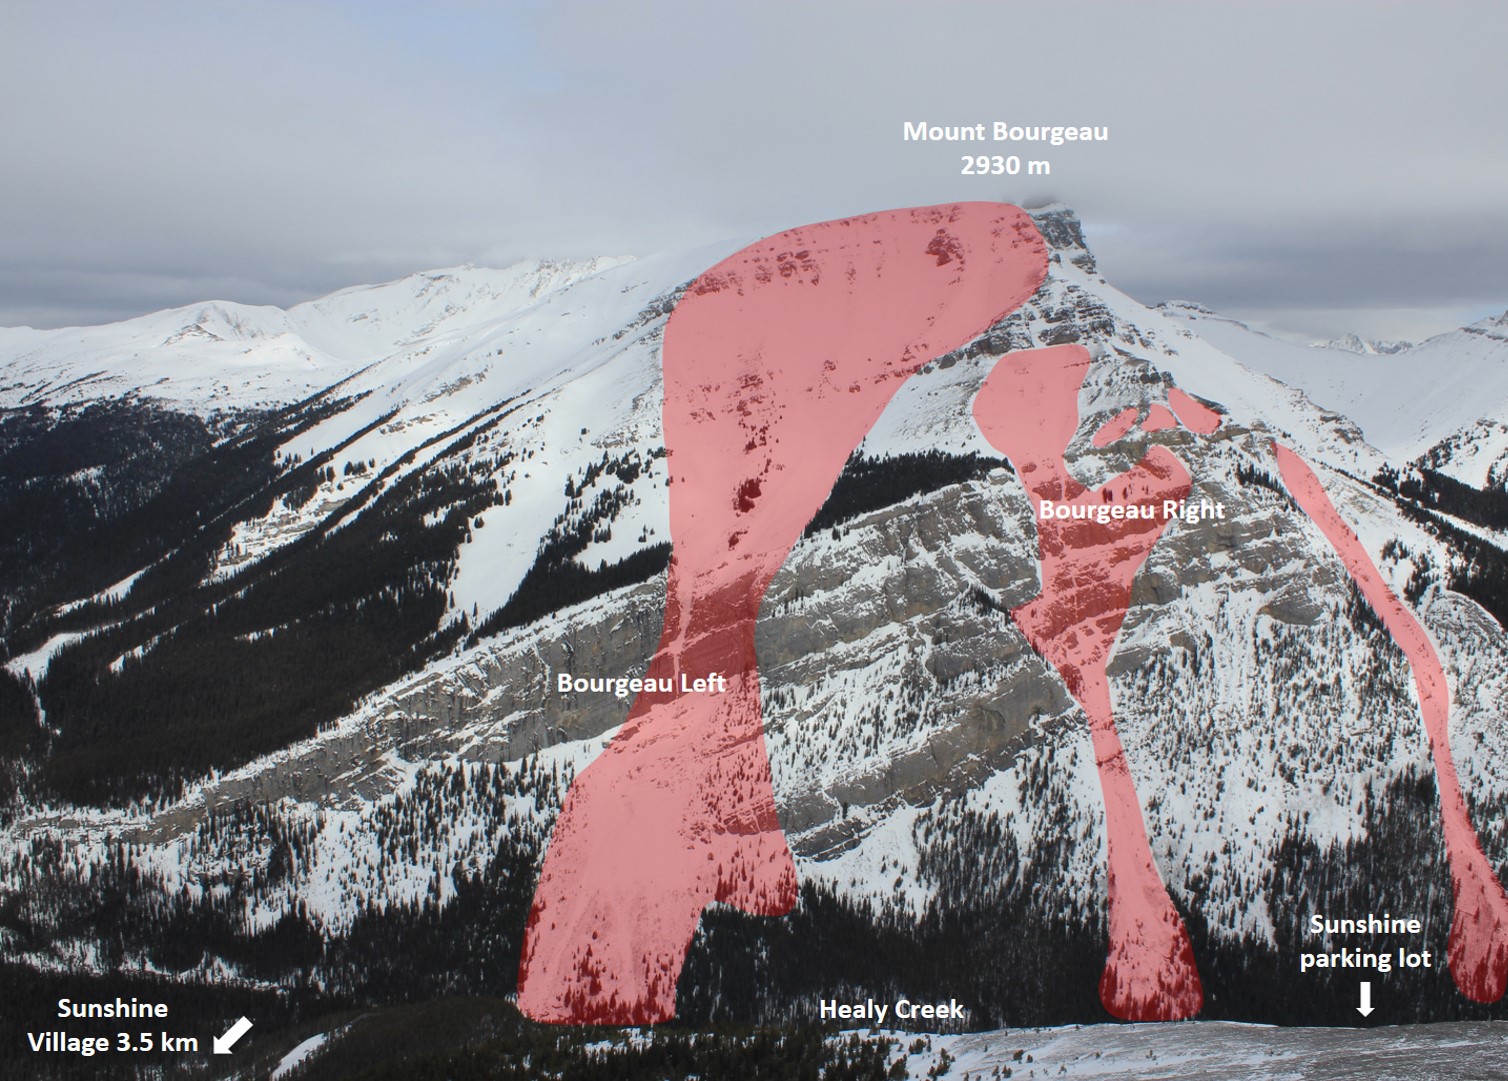 The Bourgeau Left and Bourgeau Right ice climbs and the avalanche terrain around them are highlighted in red on an image of the climbs.